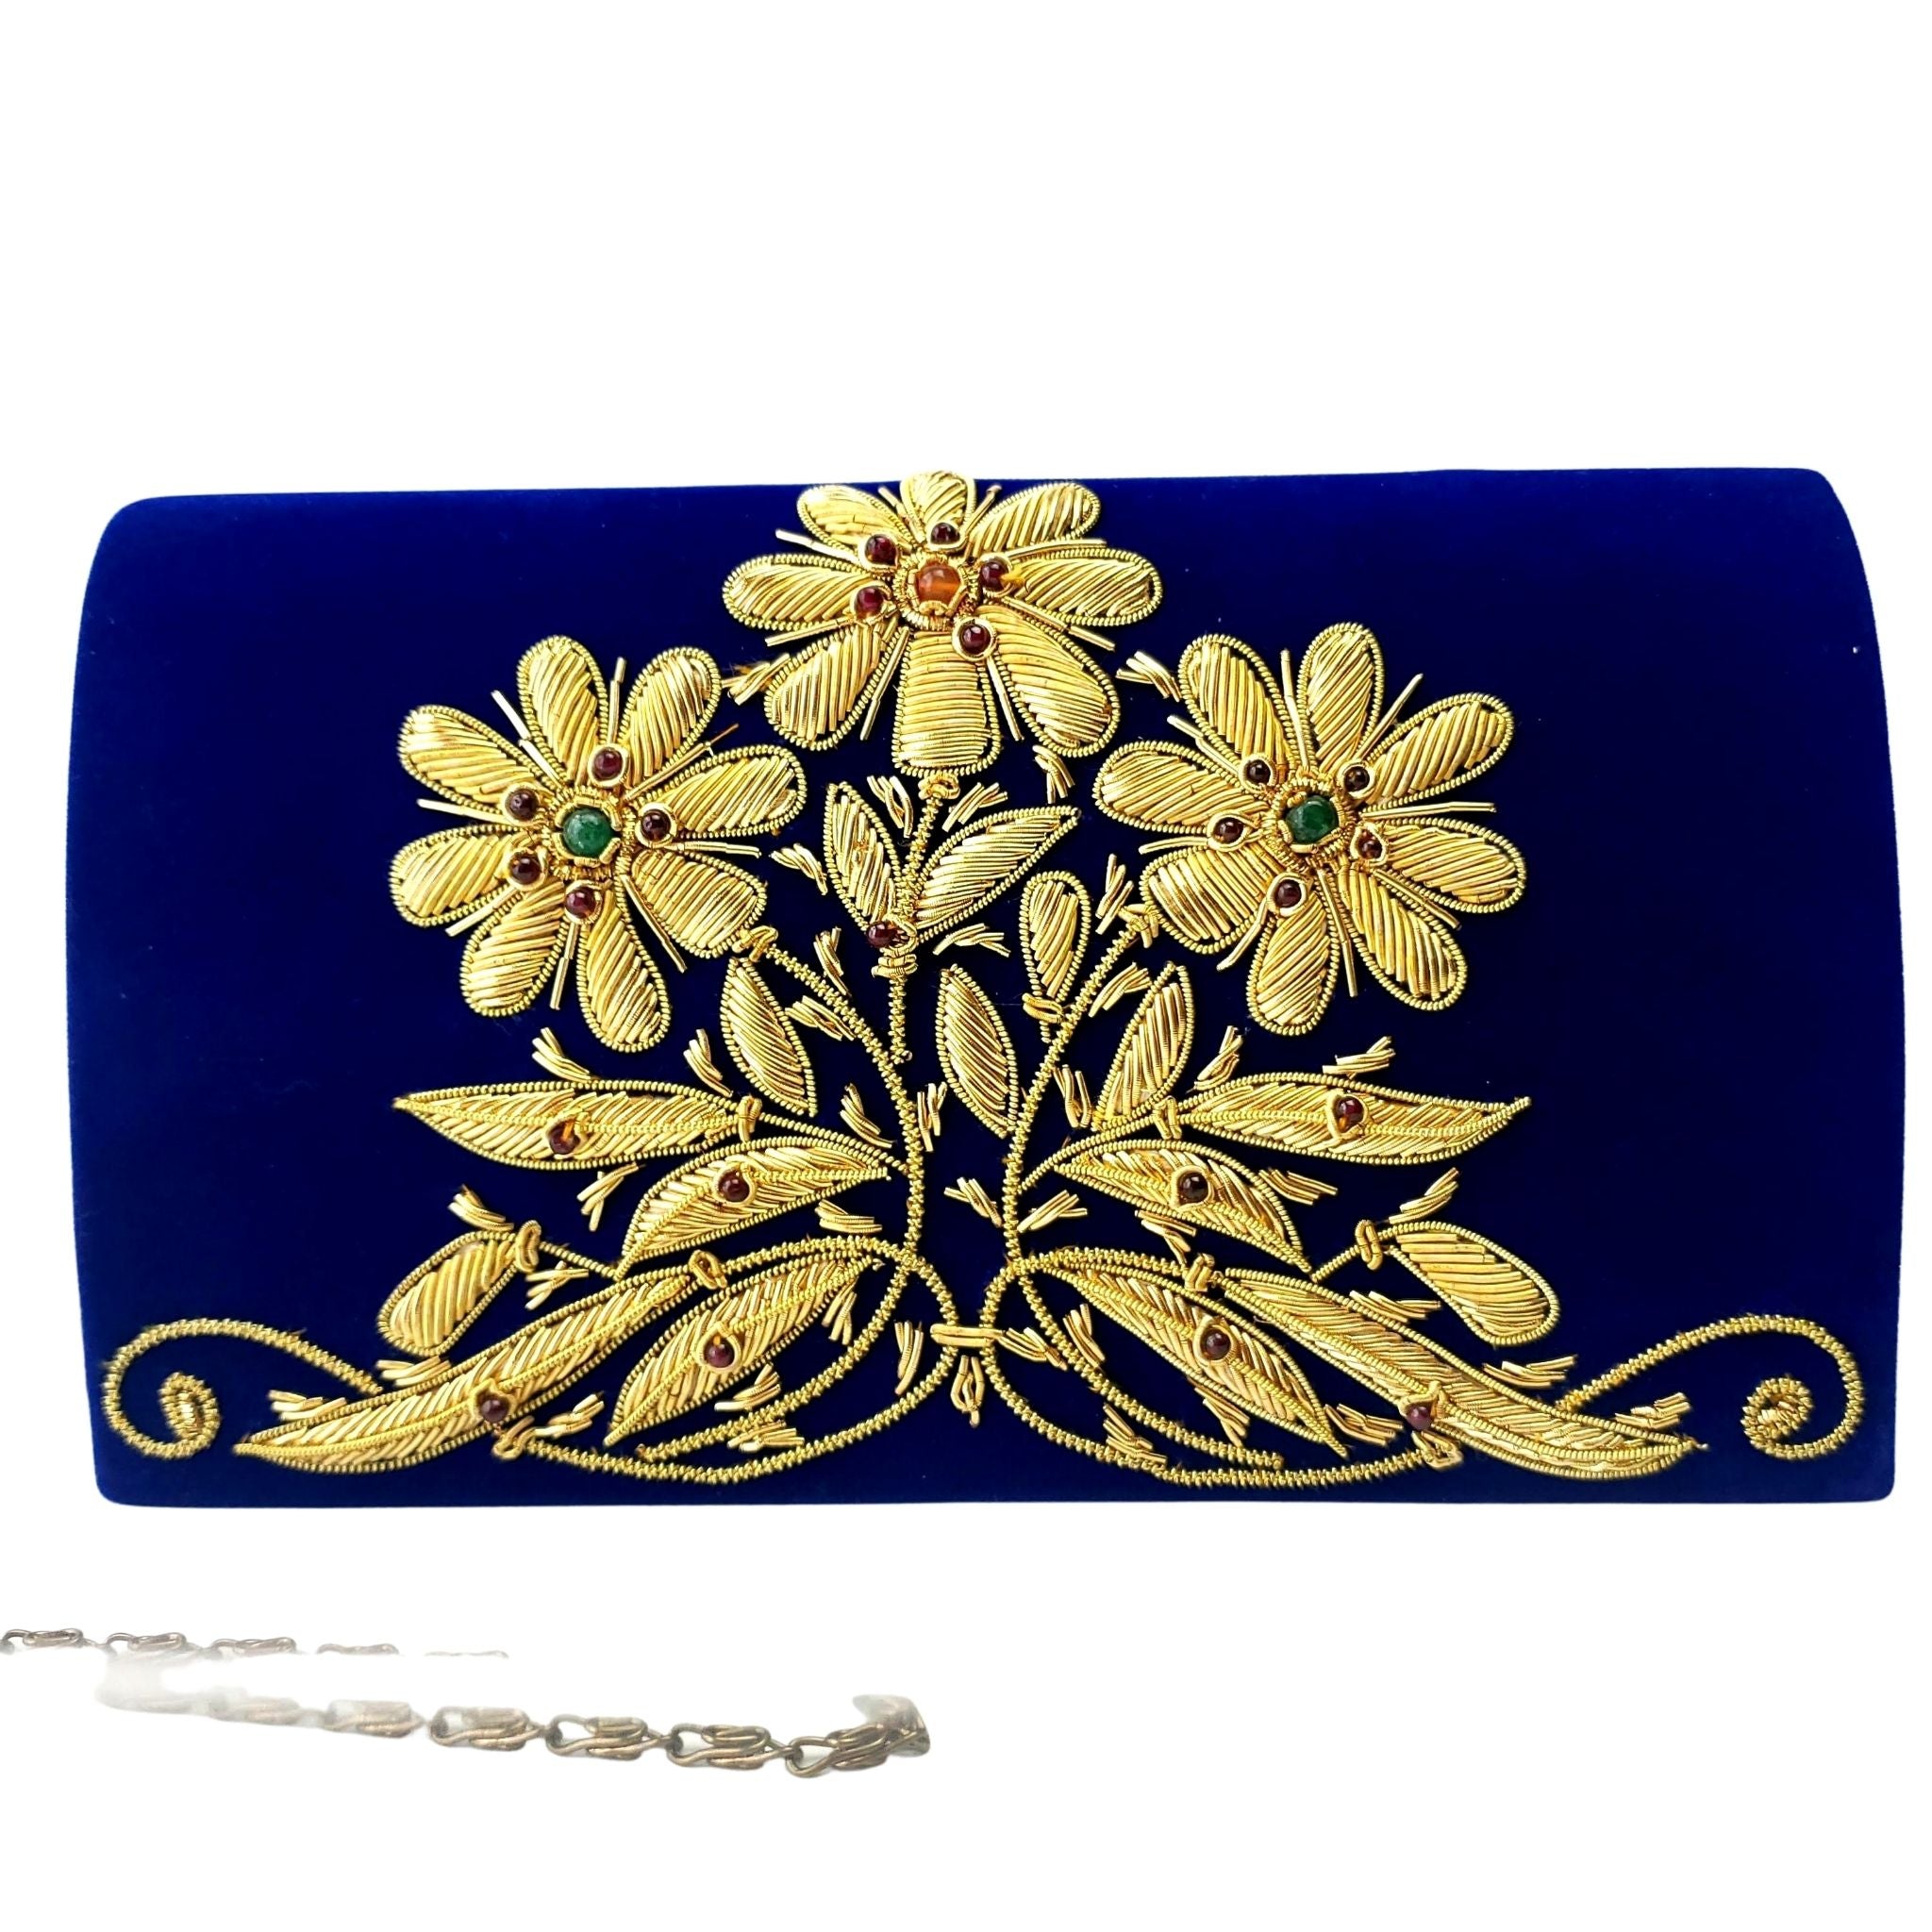 Designer Luxury Embroidery Purse Low Price Sublimation Credit Card